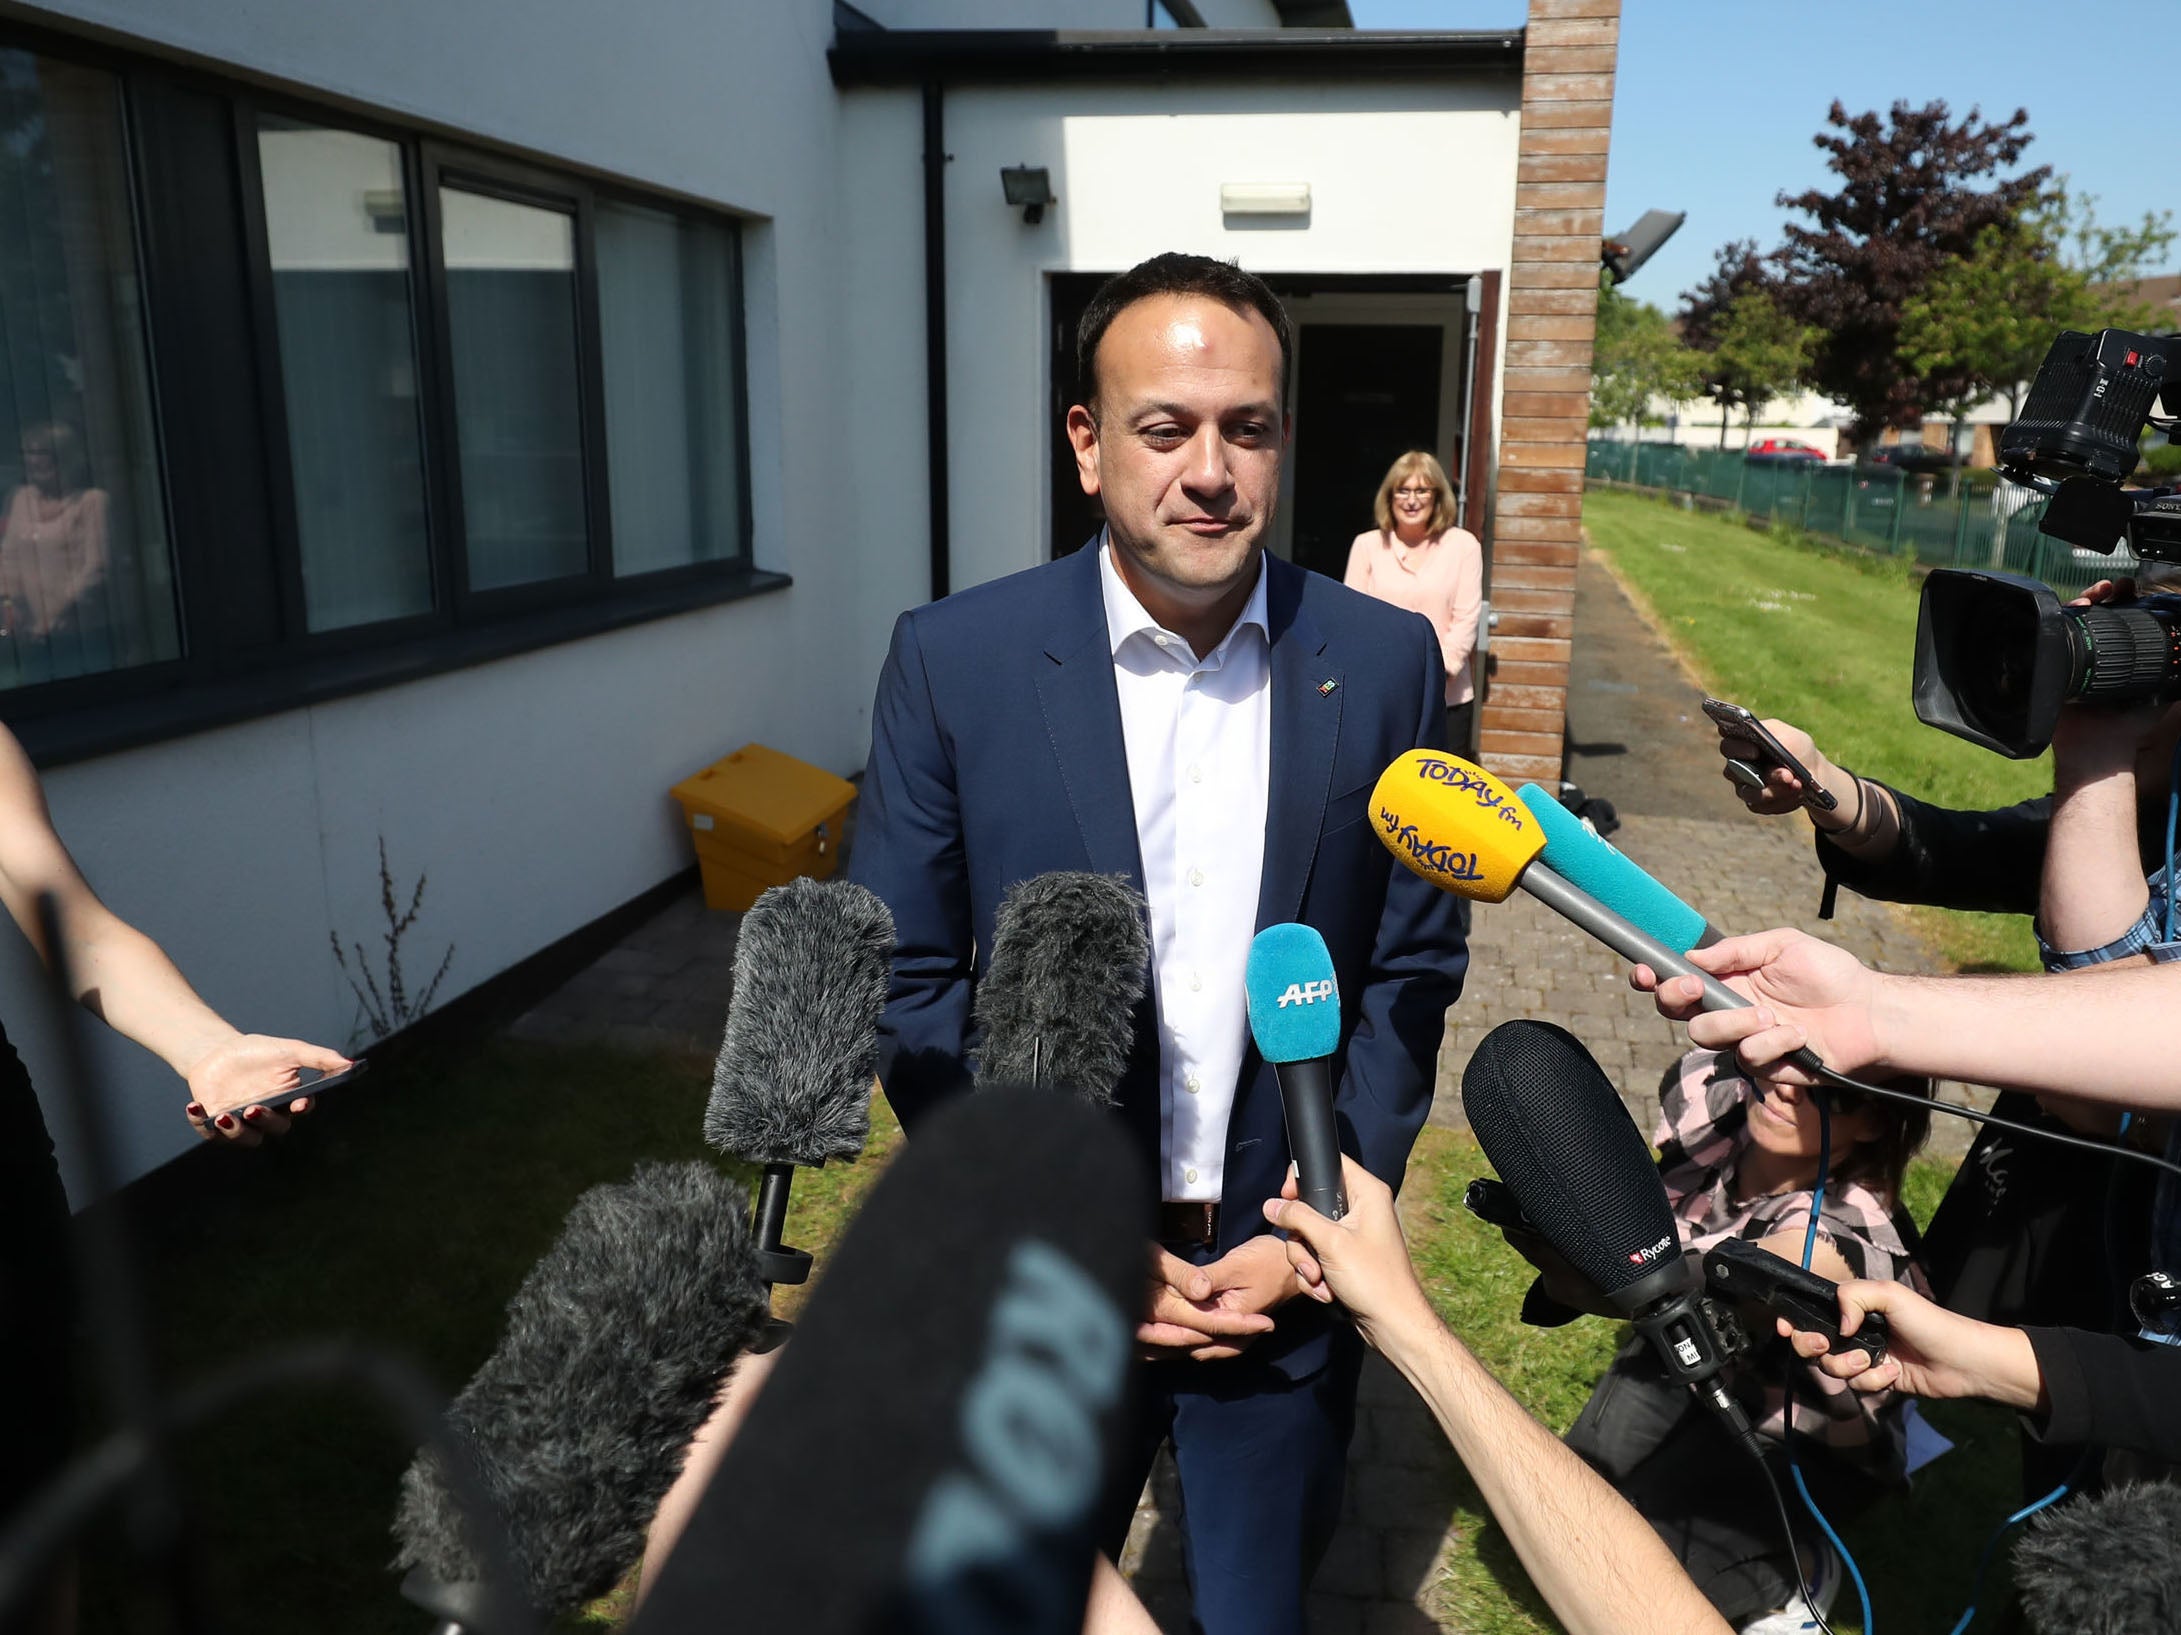 'This has been a great exercise in democracy and the people have spoken,' Mr Varadkar said